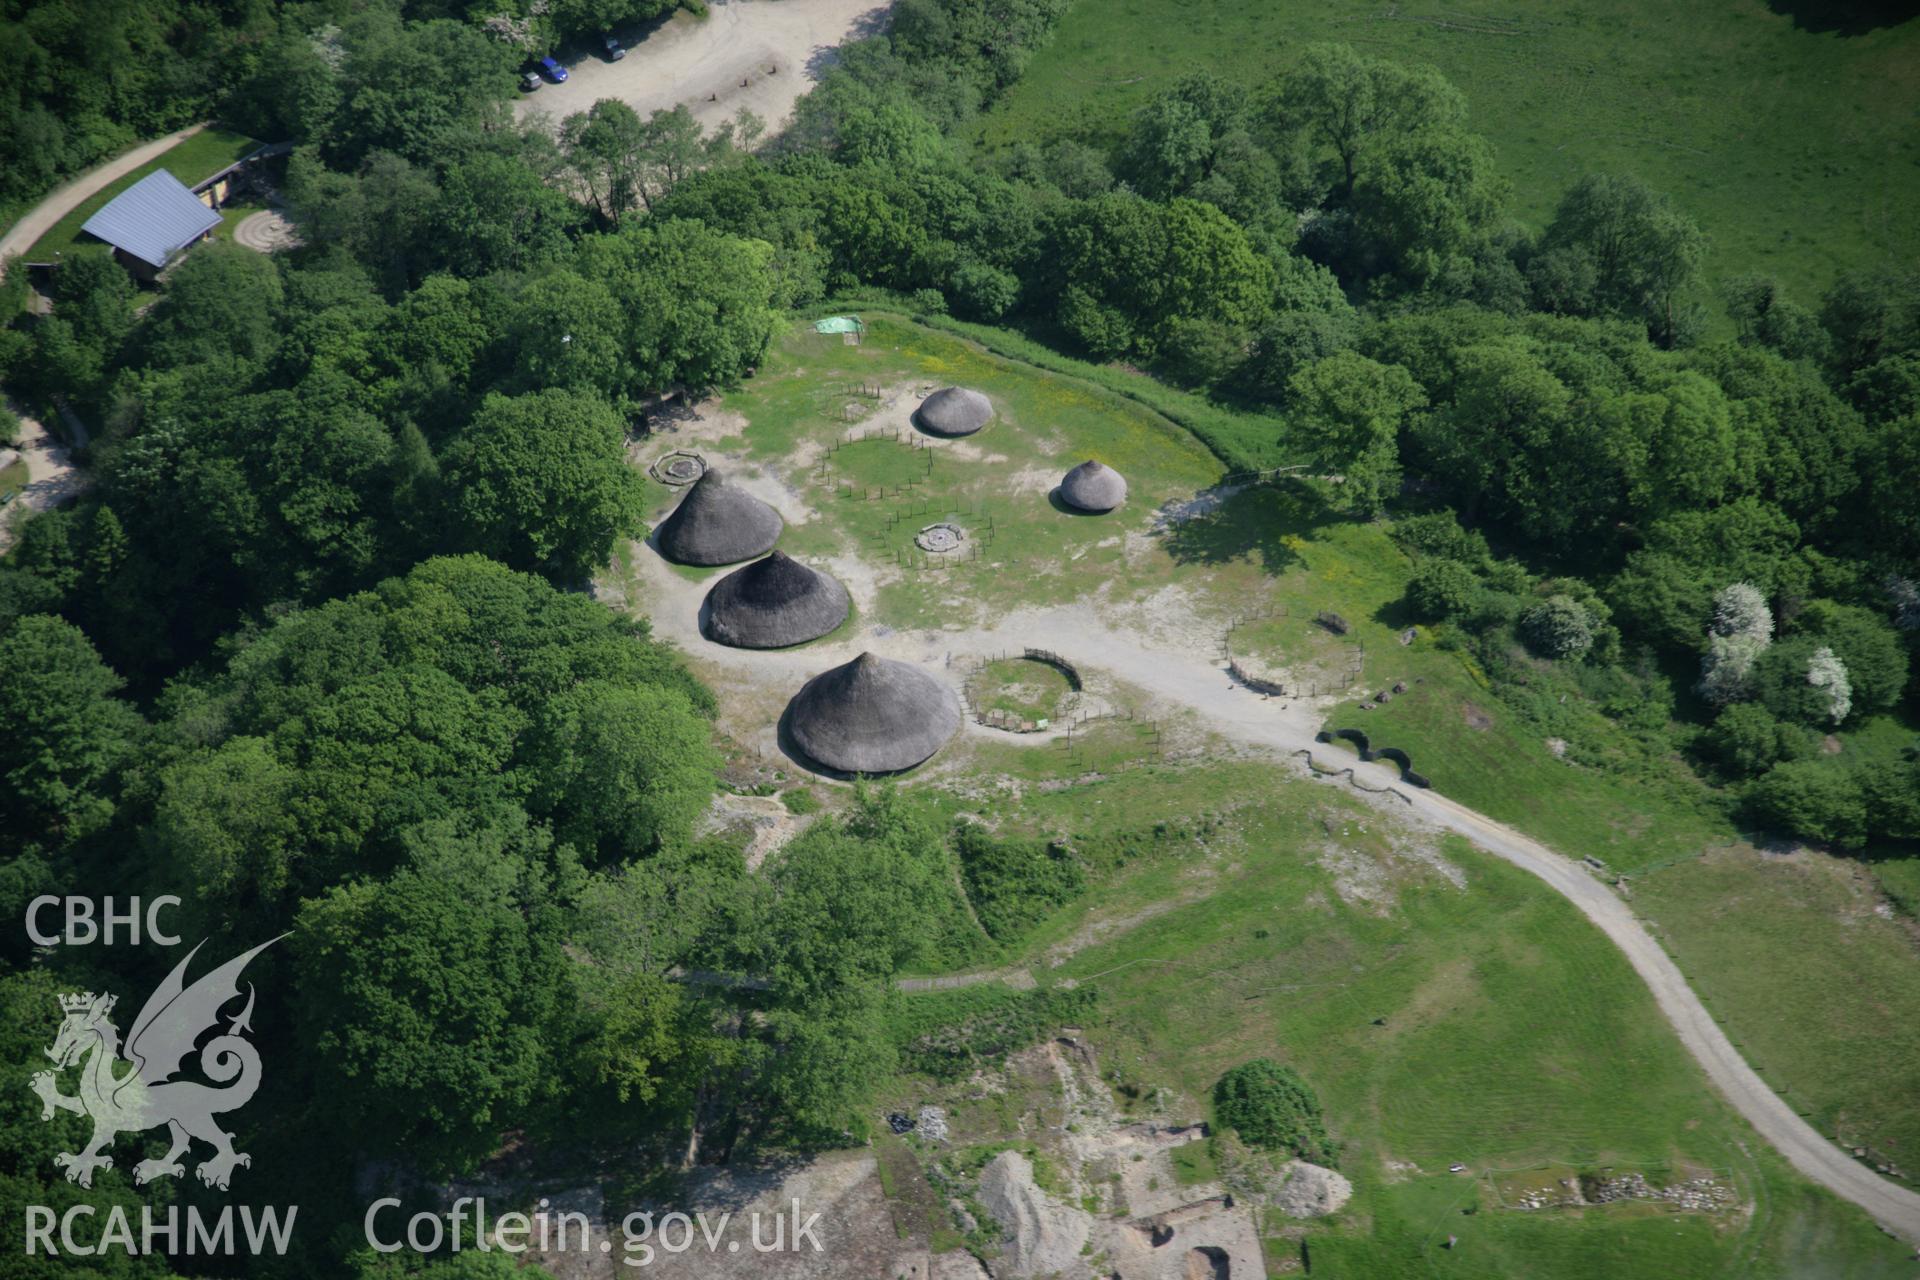 RCAHMW colour oblique aerial photograph of Castell Henllys. Taken on 08 June 2006 by Toby Driver.